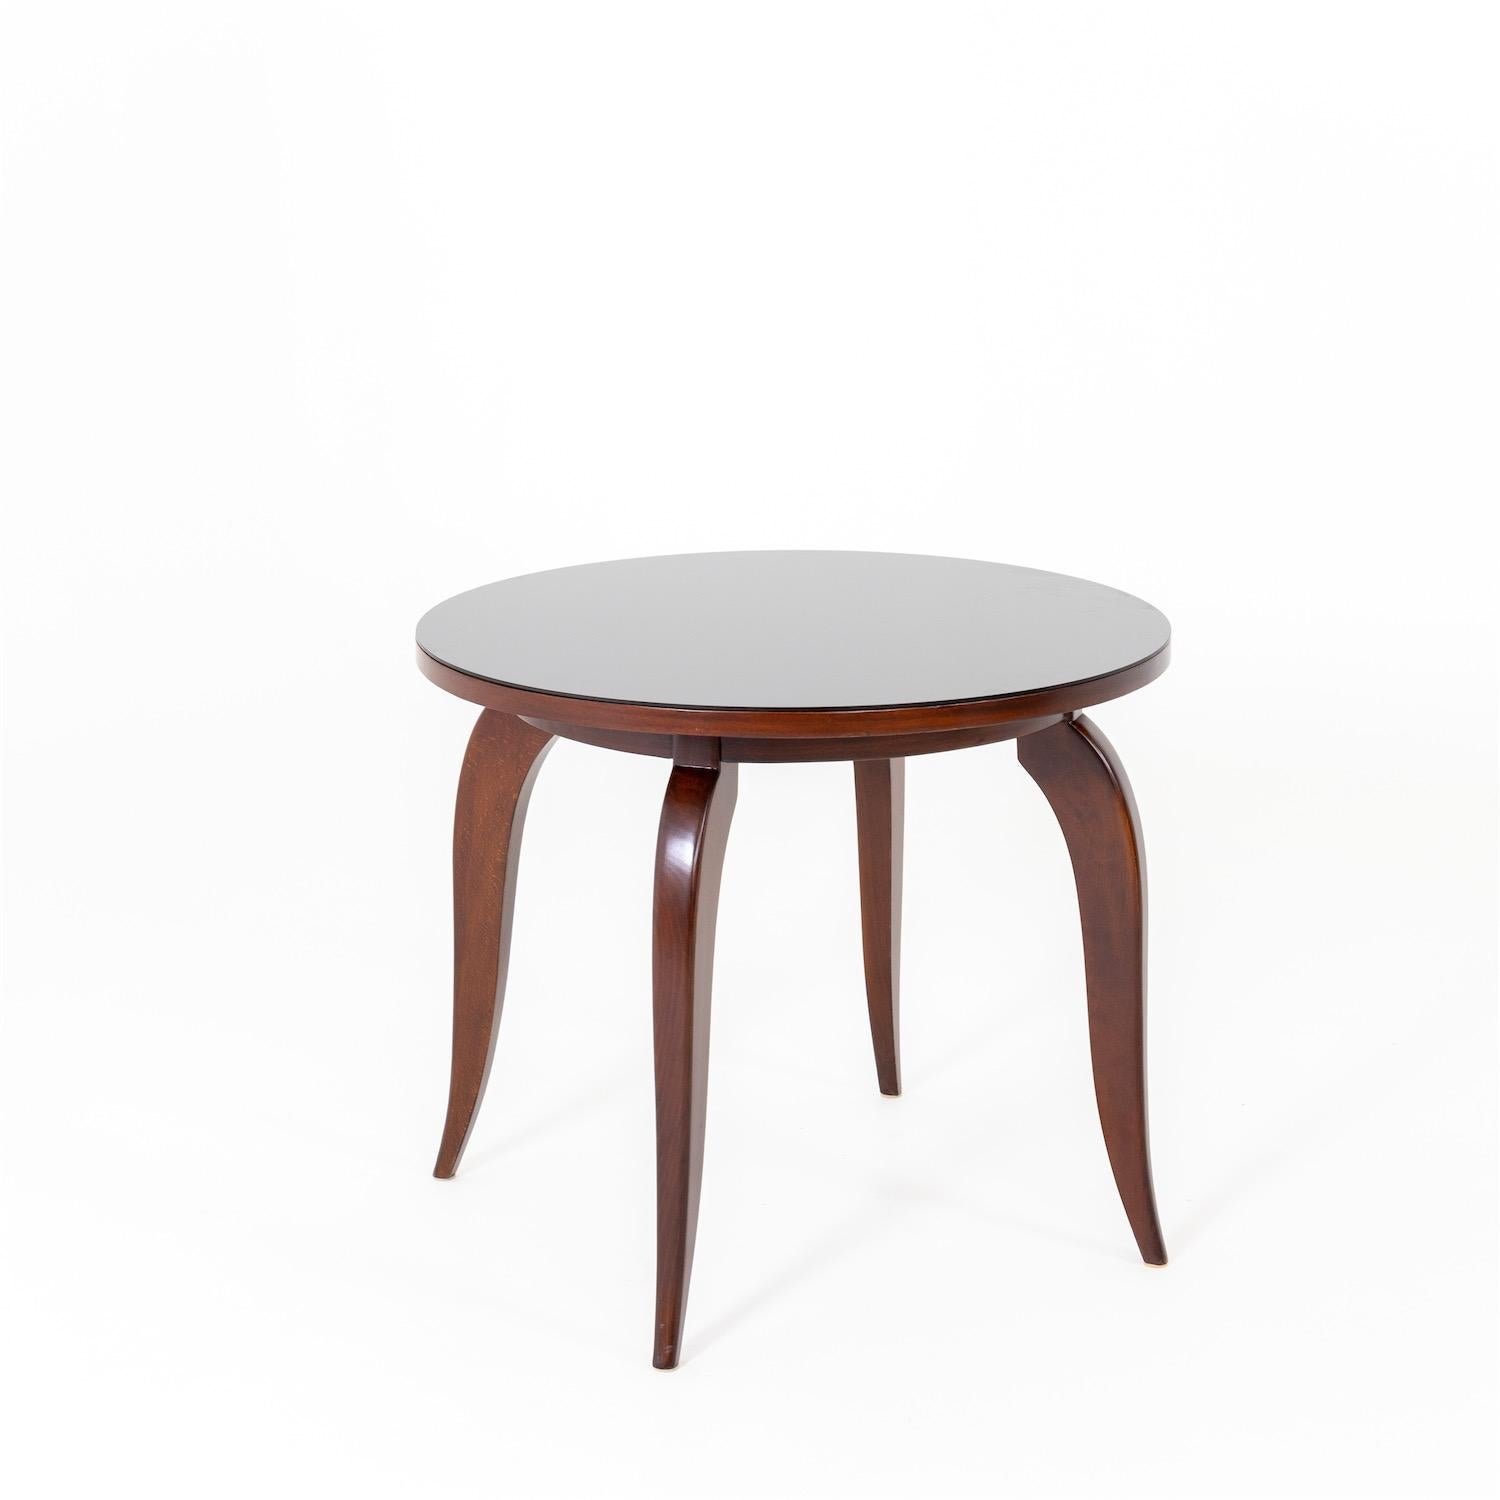 Round Art Deco table on curved elegant legs made of stained beech. The tabletop is protected with a glass pane. Professionally refurbished condition.